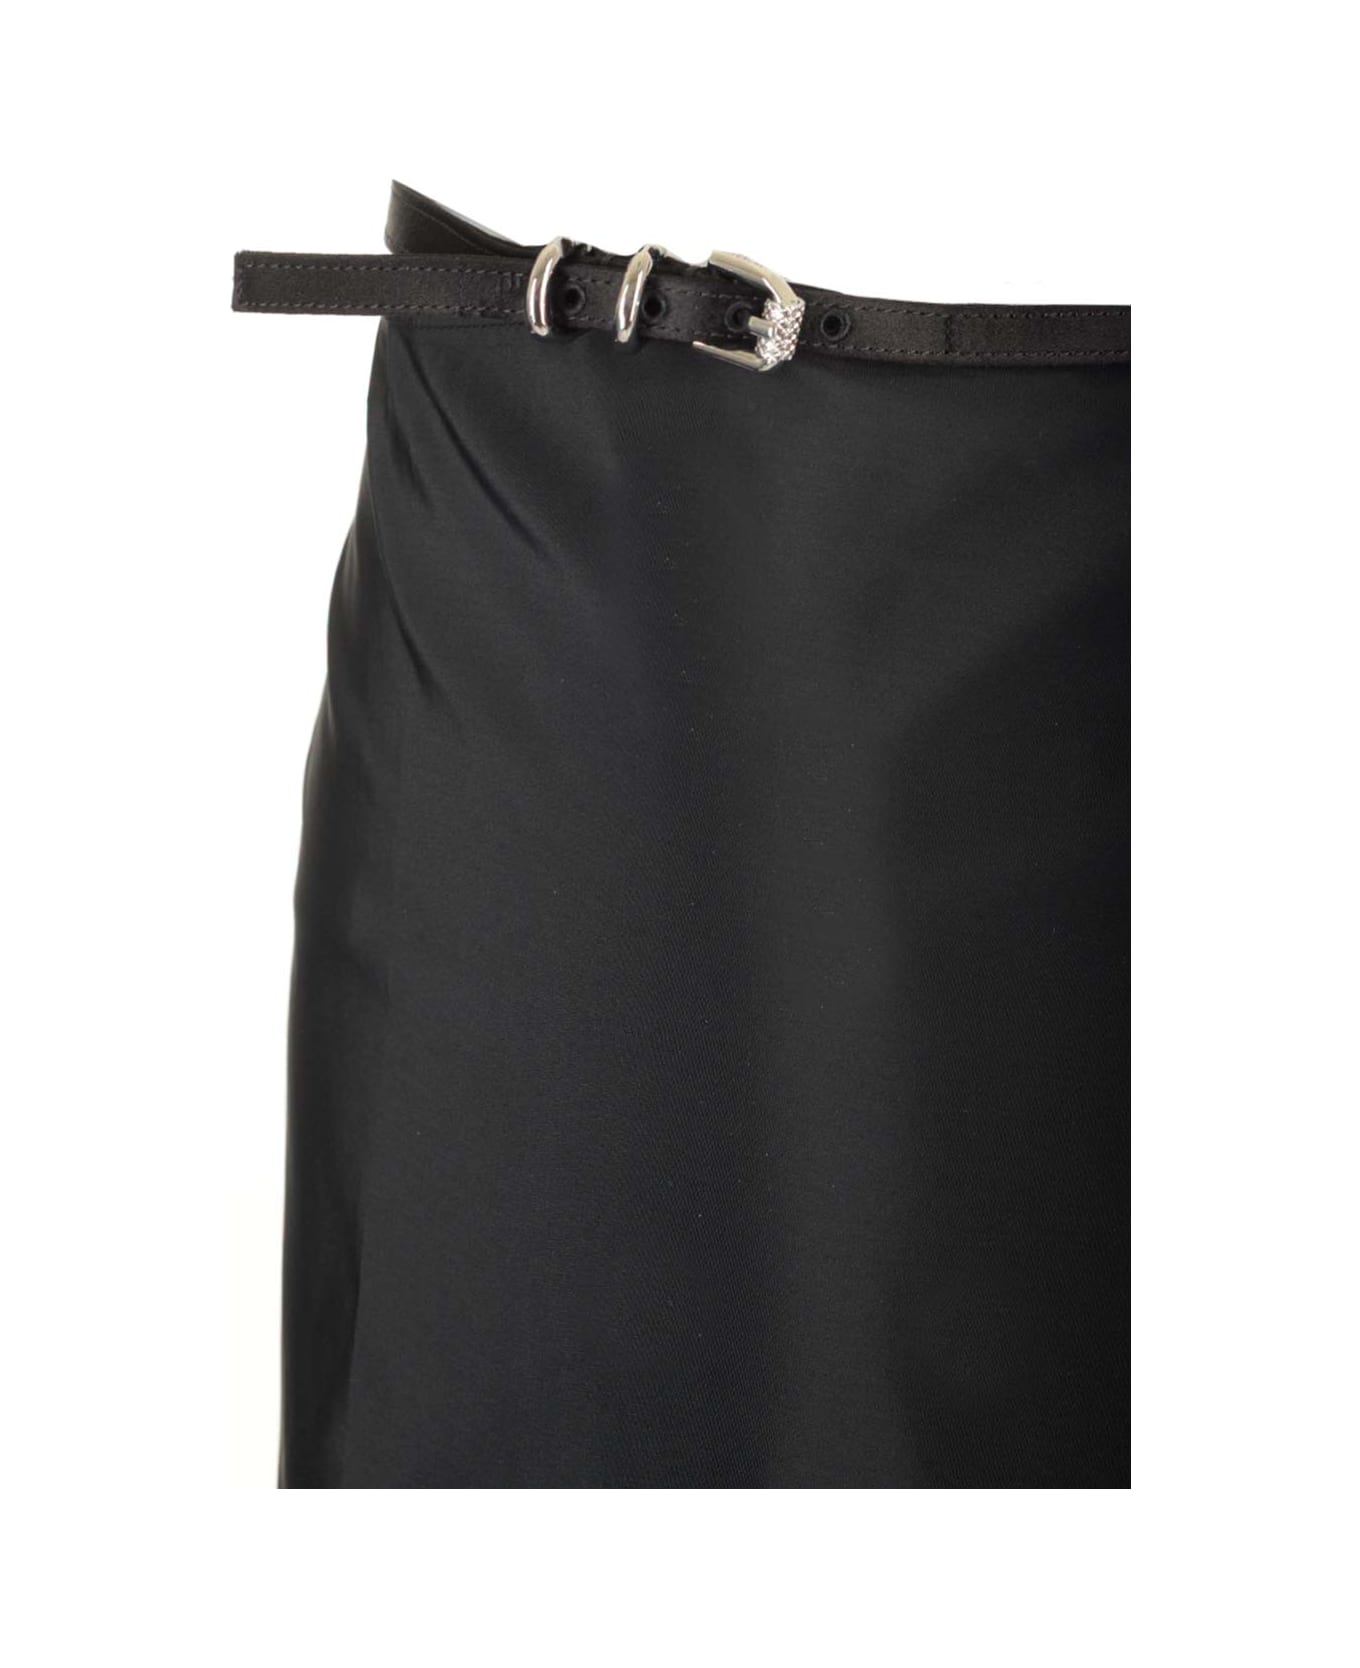 Givenchy 'voyou' Wrap Skirt - Black スカート